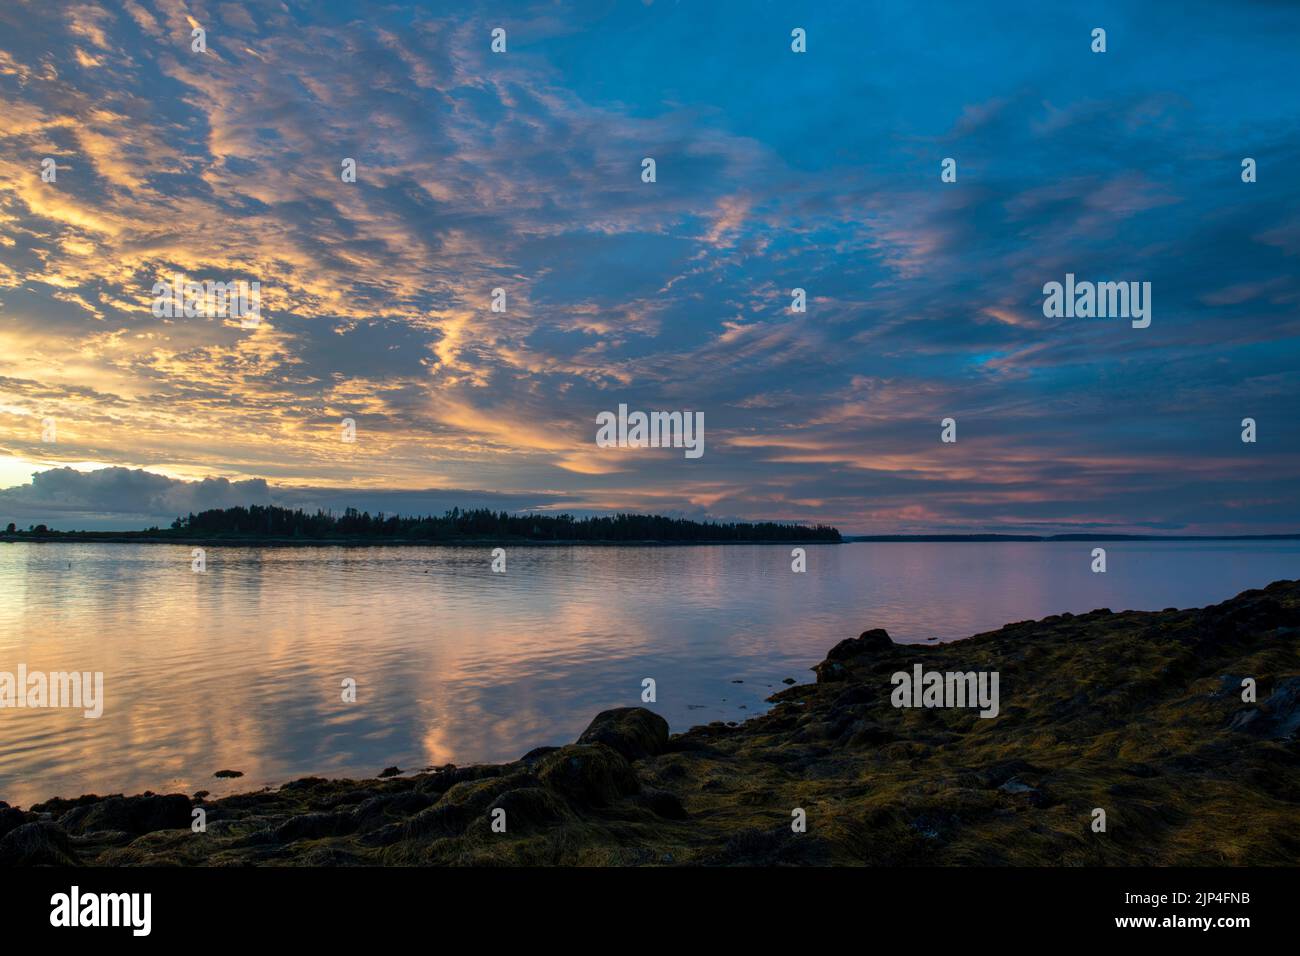 August 13, 2022.7:44 pm.  Casco Bay at sunset from Barnes Island.  Whaleboat Island at middle. Stock Photo